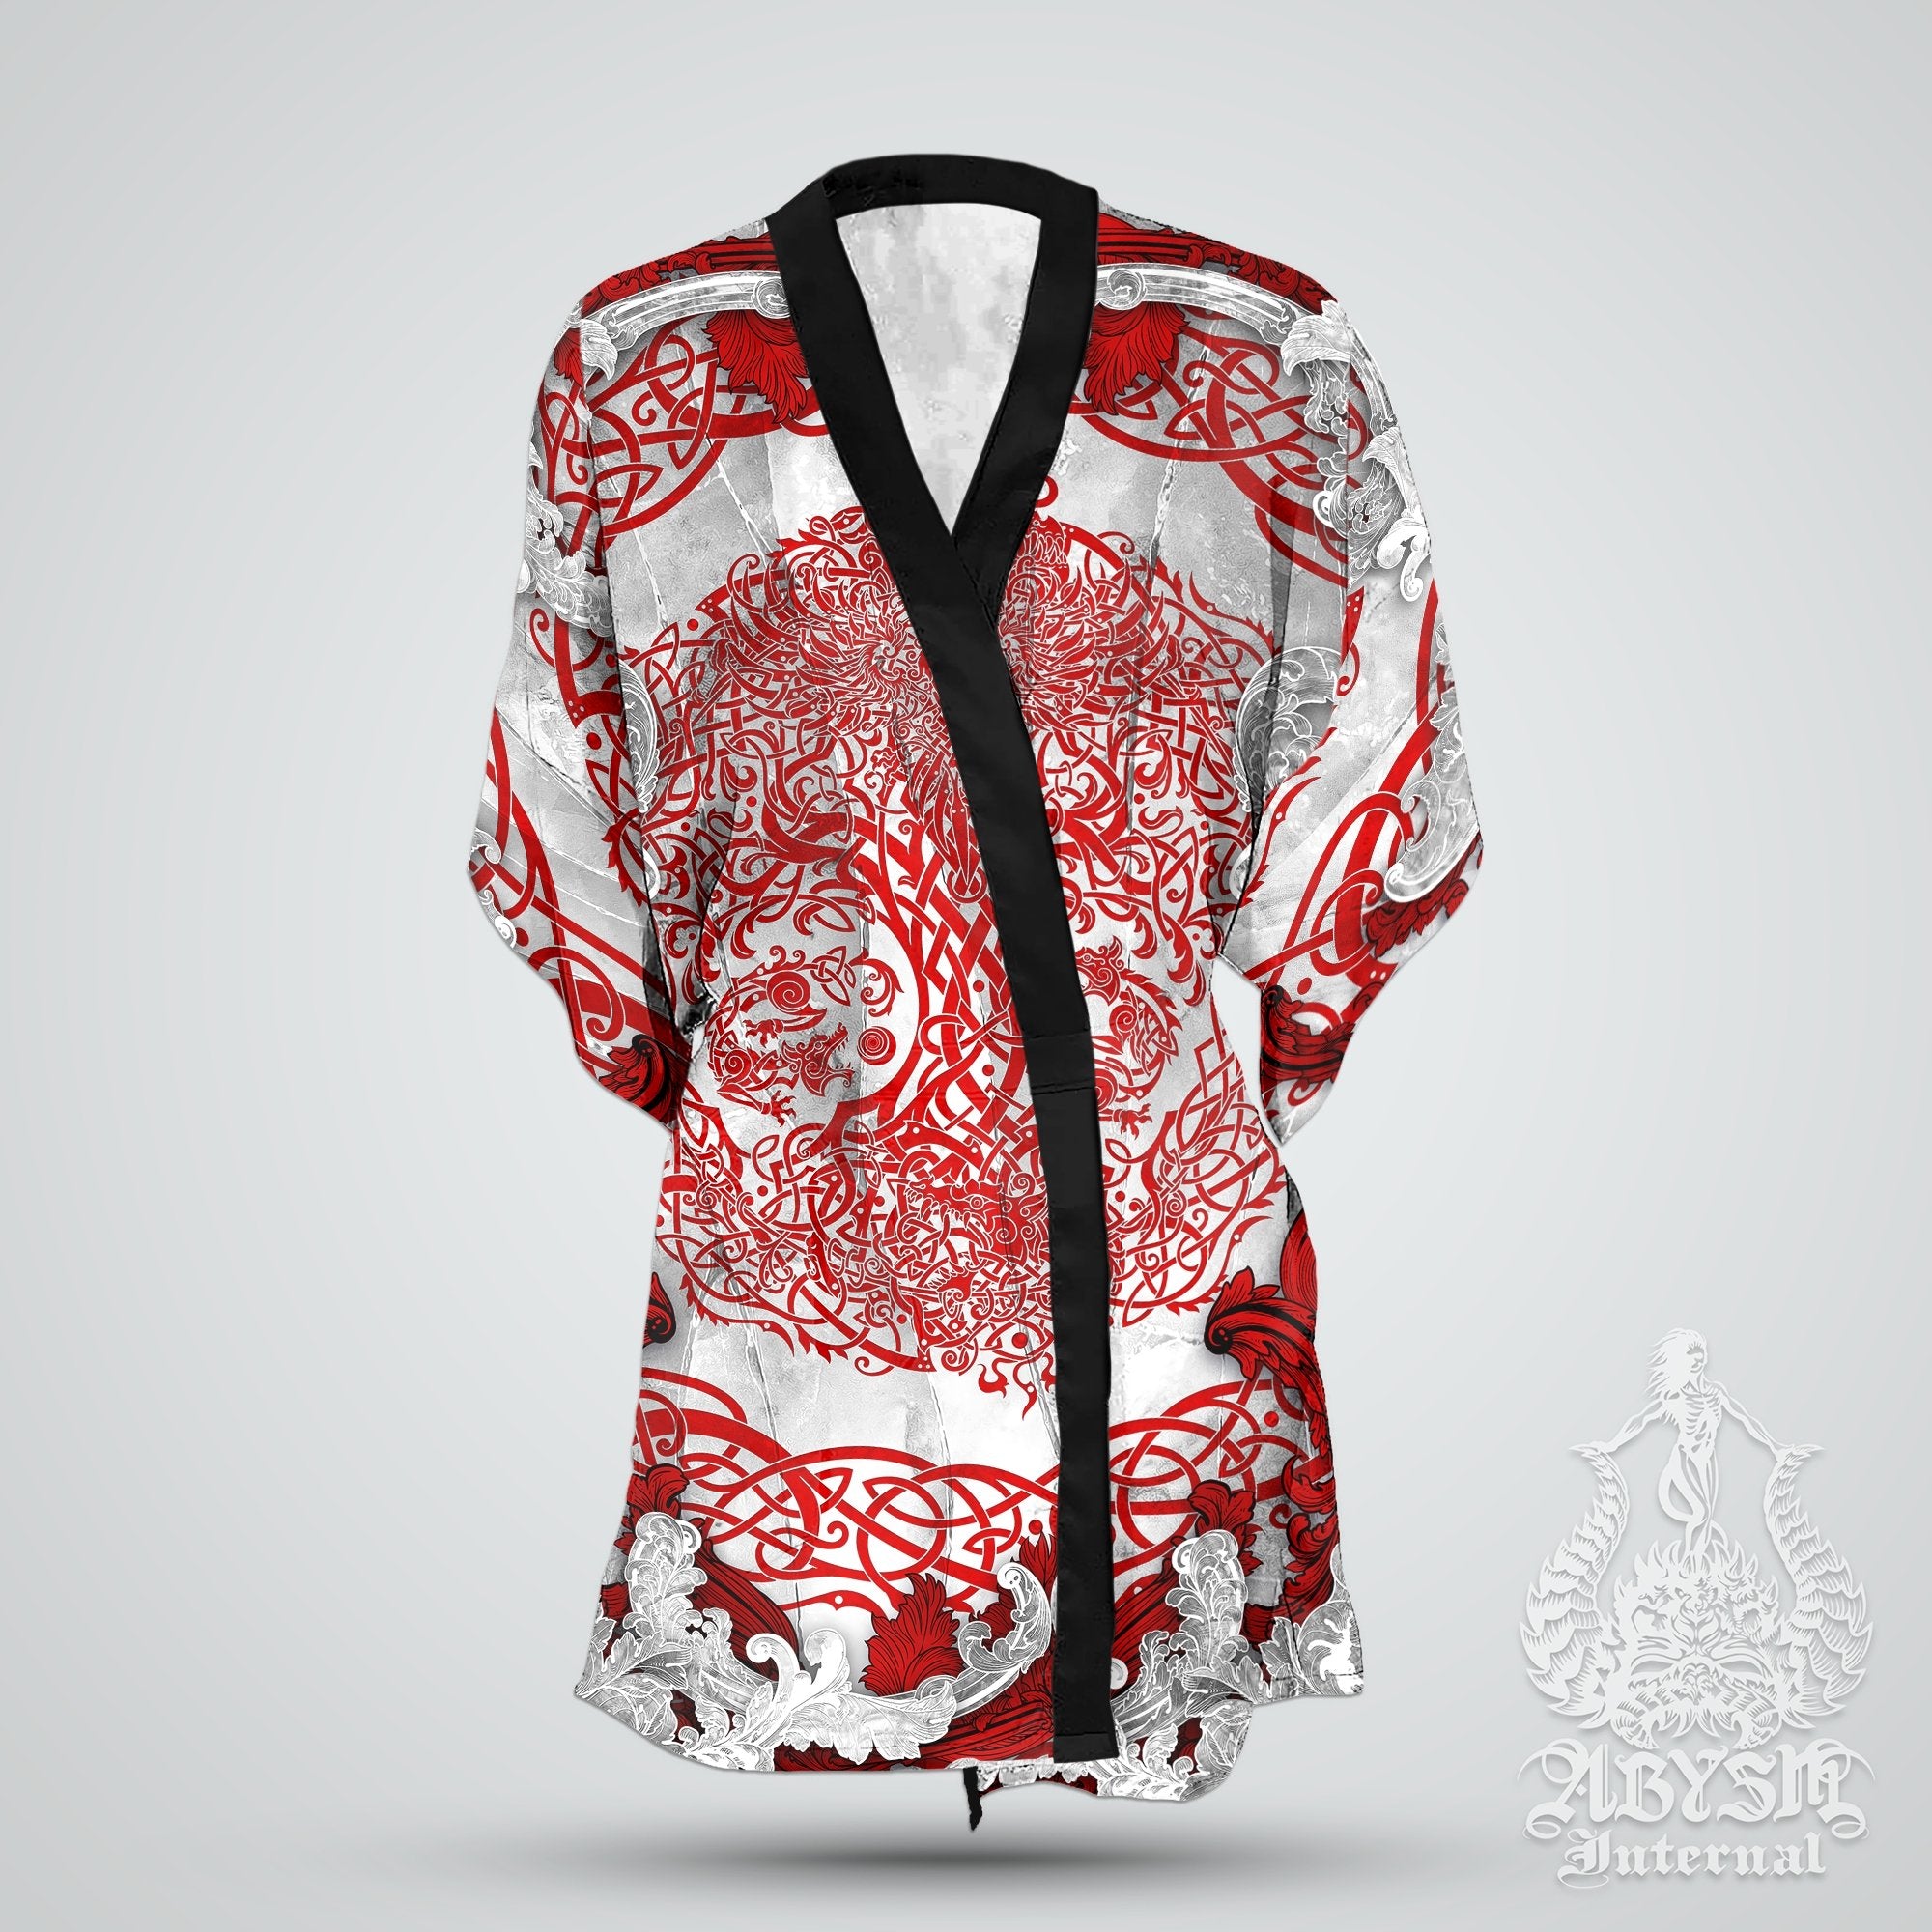 Viking Cover Up, Beach Outfit, Yggdrasil Party Kimono, Summer Festival Robe, Norse Indie and Alternative Clothing, Unisex - Tree of Life, Bloody White - Abysm Internal